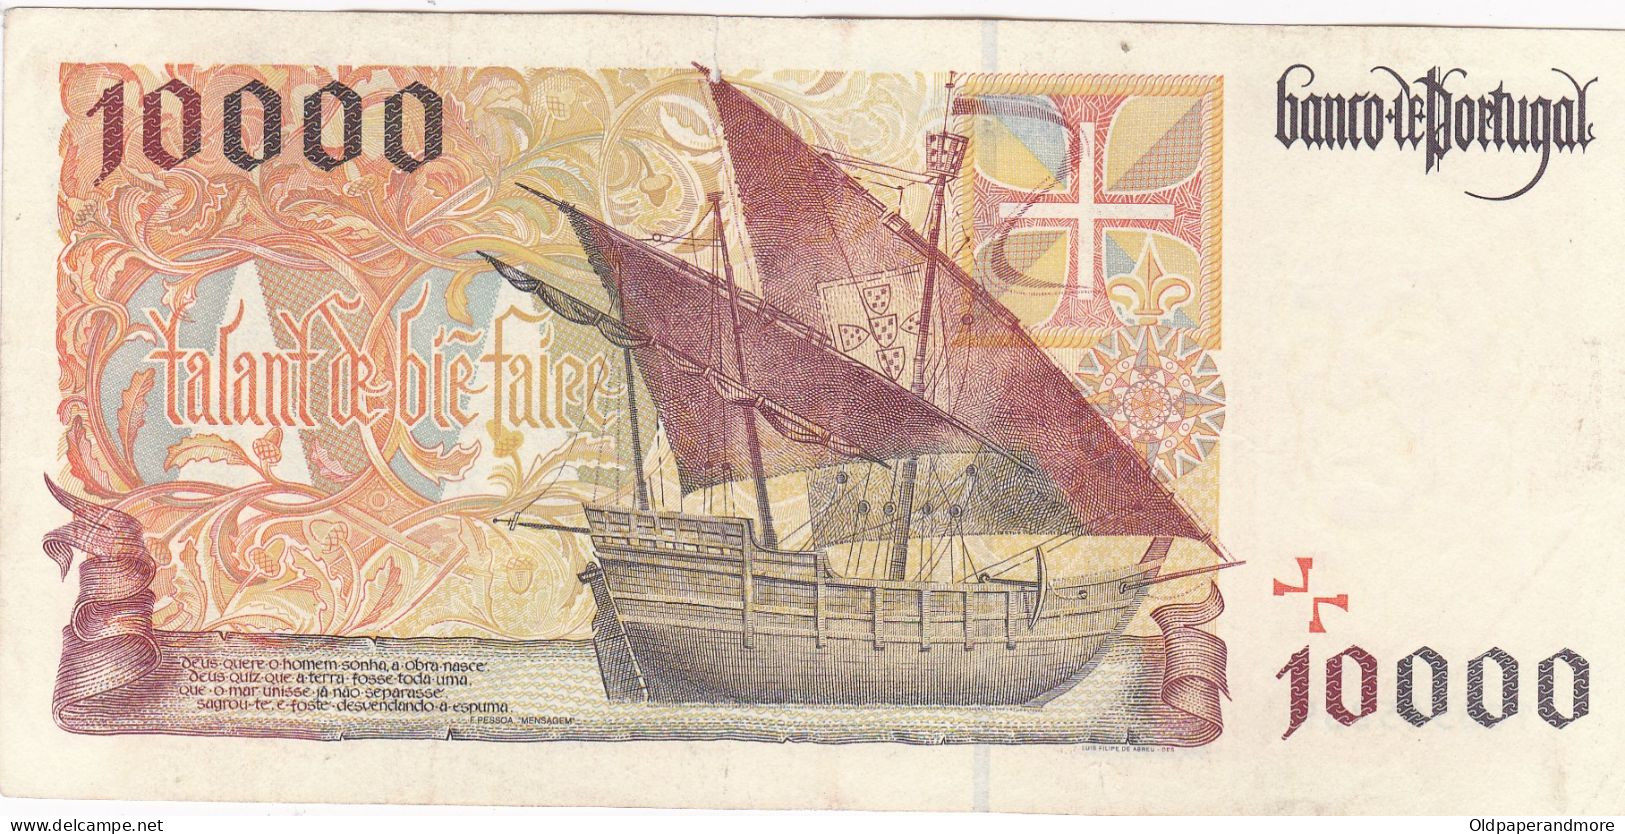 PORTUGAL BANK NOTE - BANKNOTE - 10 000$00 - CH 2  - 02/05/1996 USED - Portugal